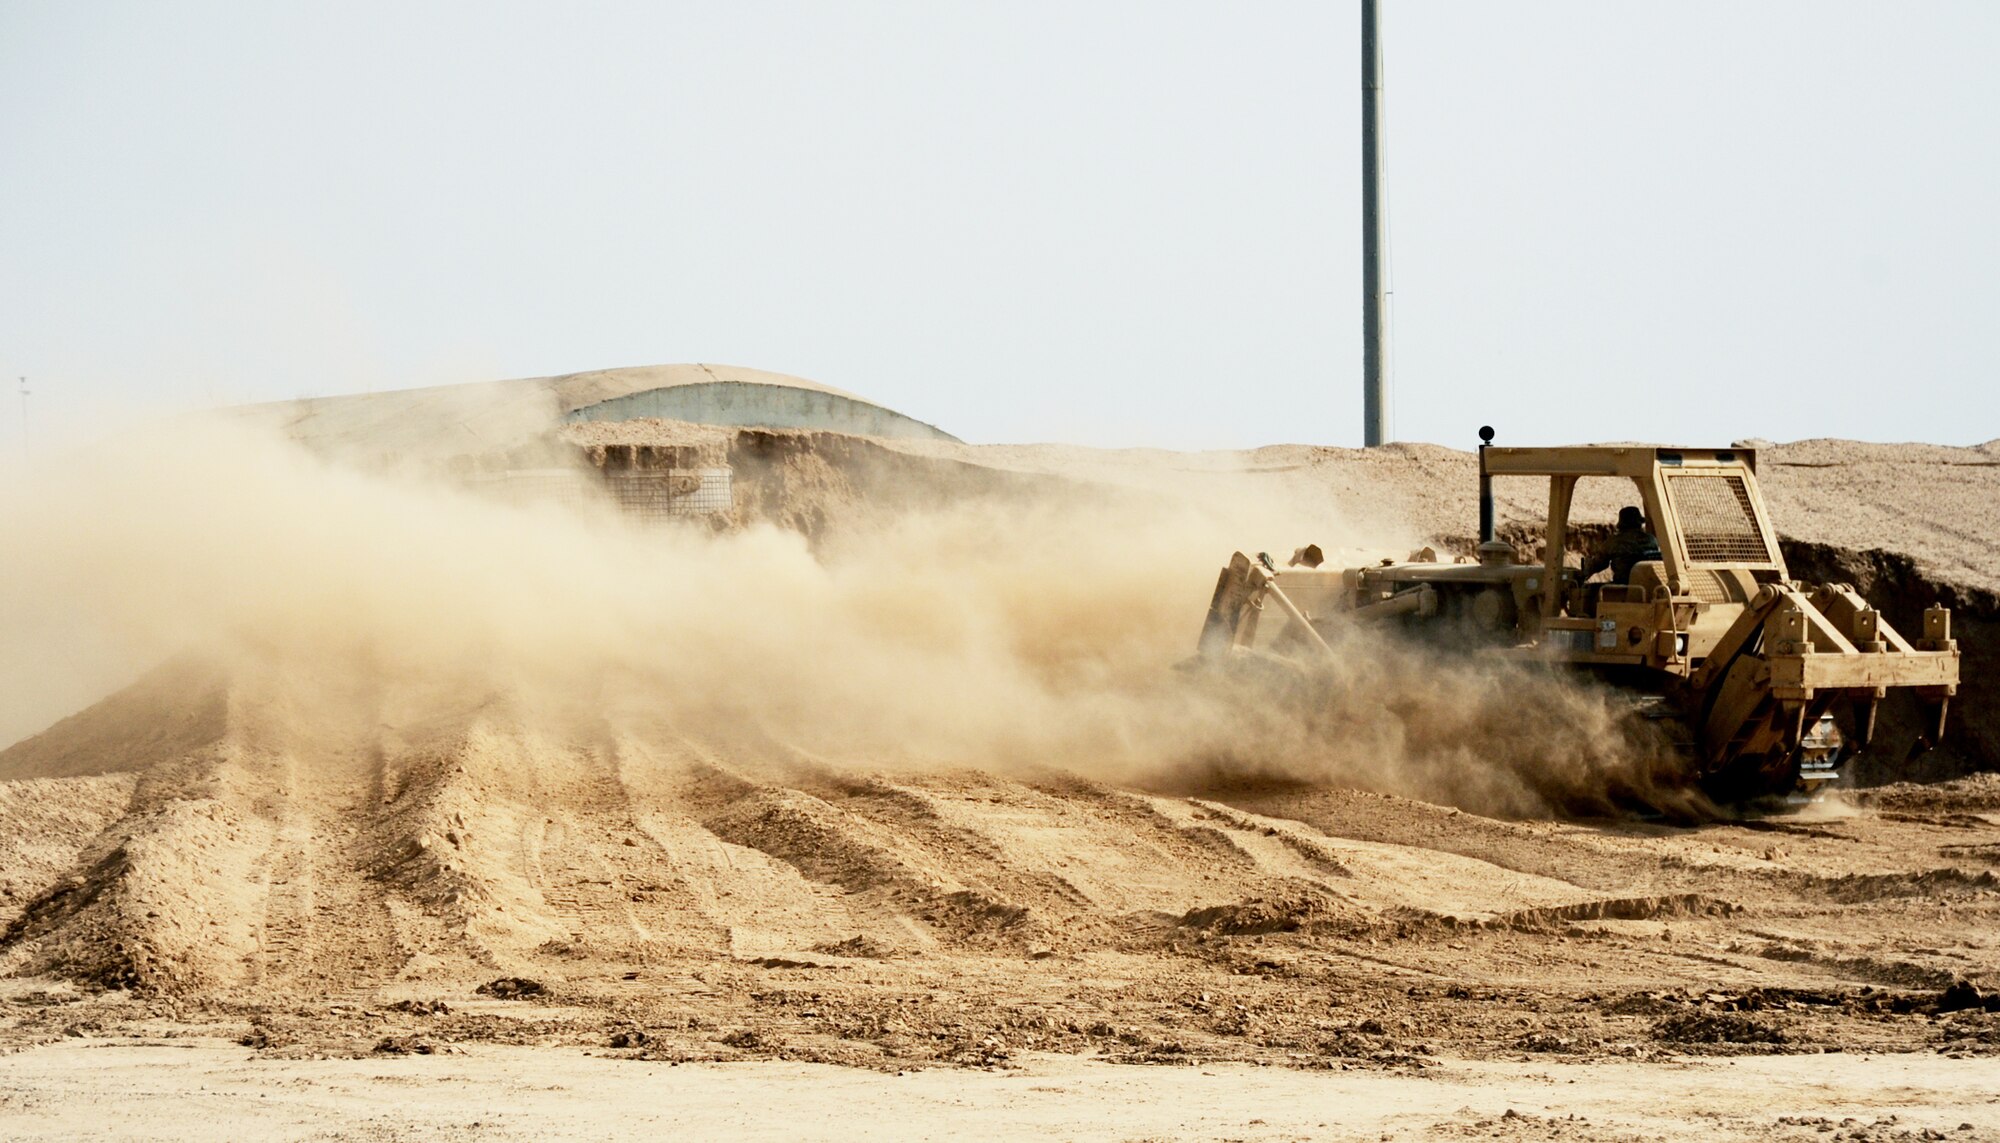 An Airman stockpiles dirt with a bulldozer during construction of a new container repair yard Nov. 2, 2009, at Joint Base Balad, Iraq. By using containers repaired here instead of purchasing new ones, the projected savings total more than $100 million as military assets withdraw from Iraq. The Airman is from the 732nd Expeditionary Civil Engineer Squadron. (U.S. Air Force photo/Senior Airman Christopher Hubenthal) 